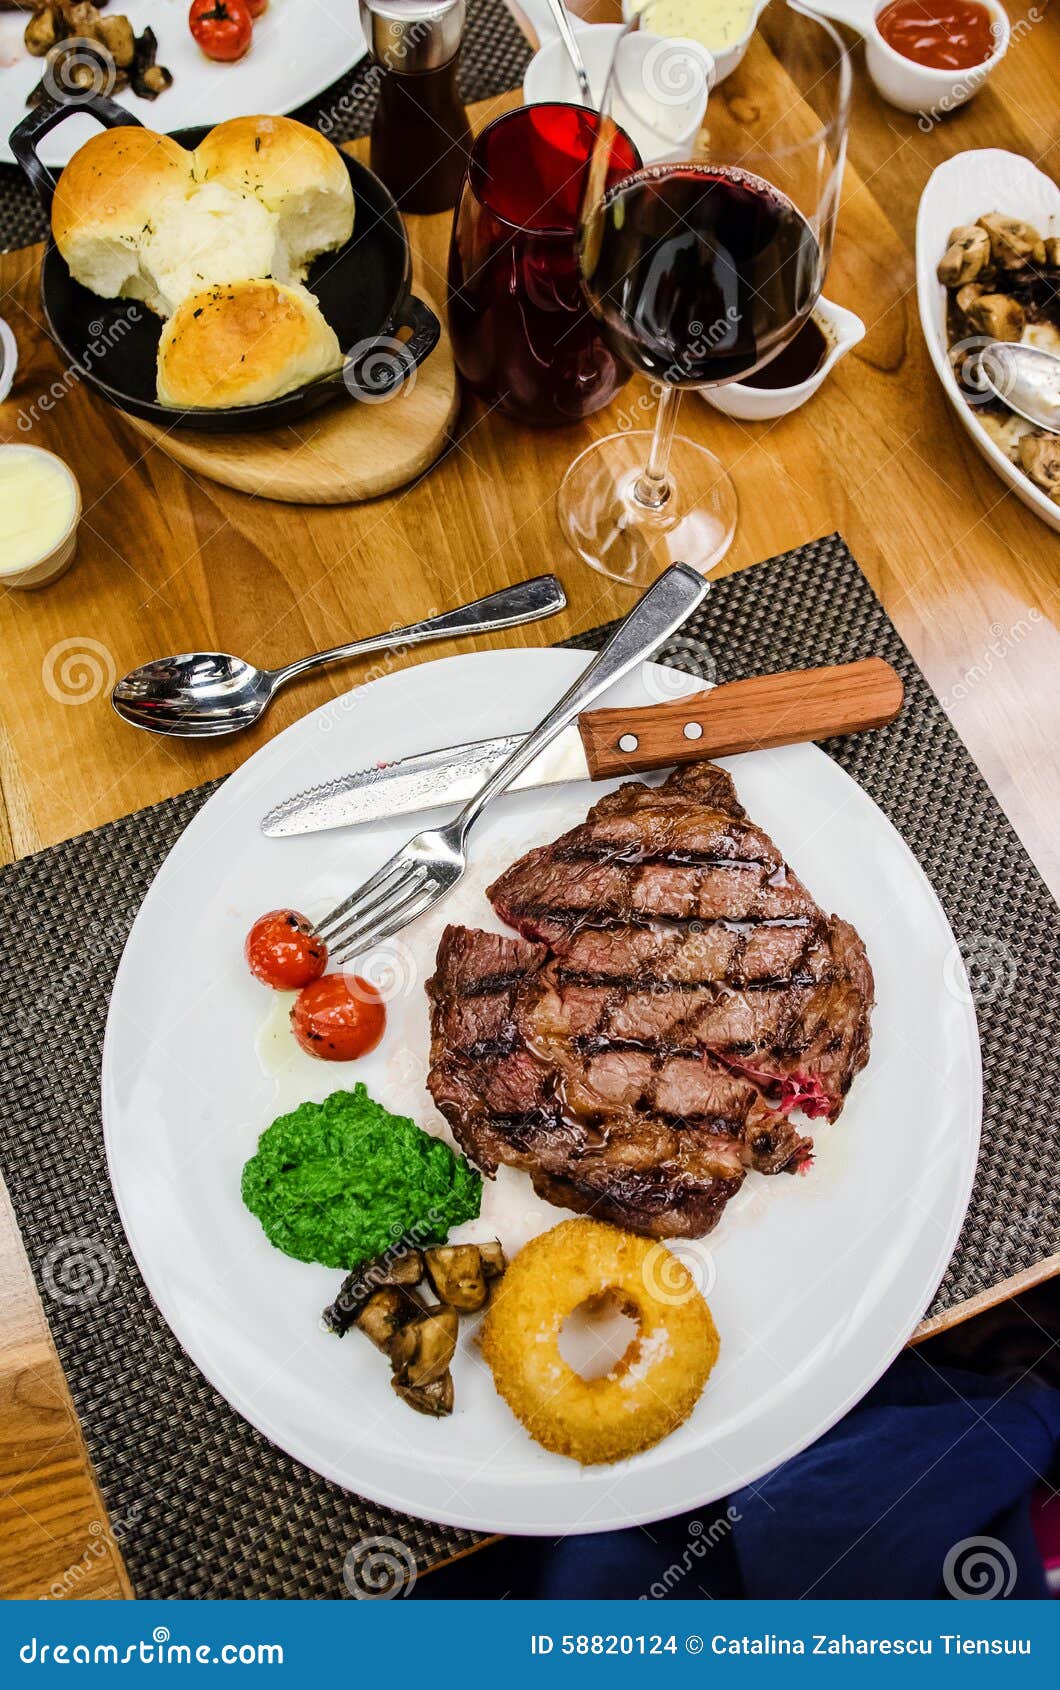 Beef entrecote steak stock photo. Image of grill, sauce - 58820124